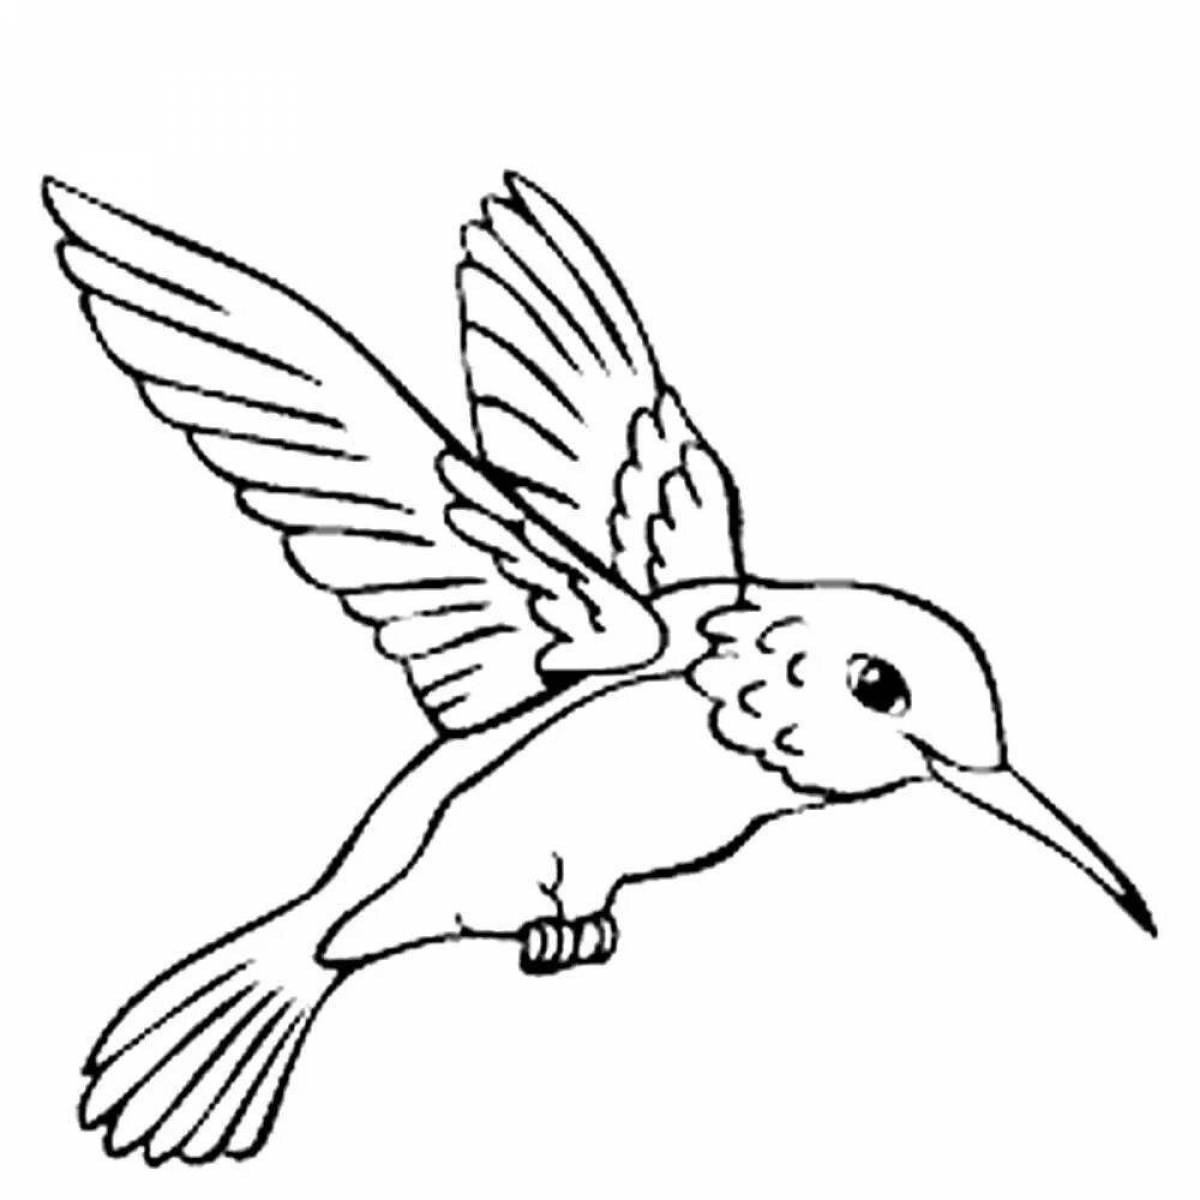 Children's coloring pages of birds